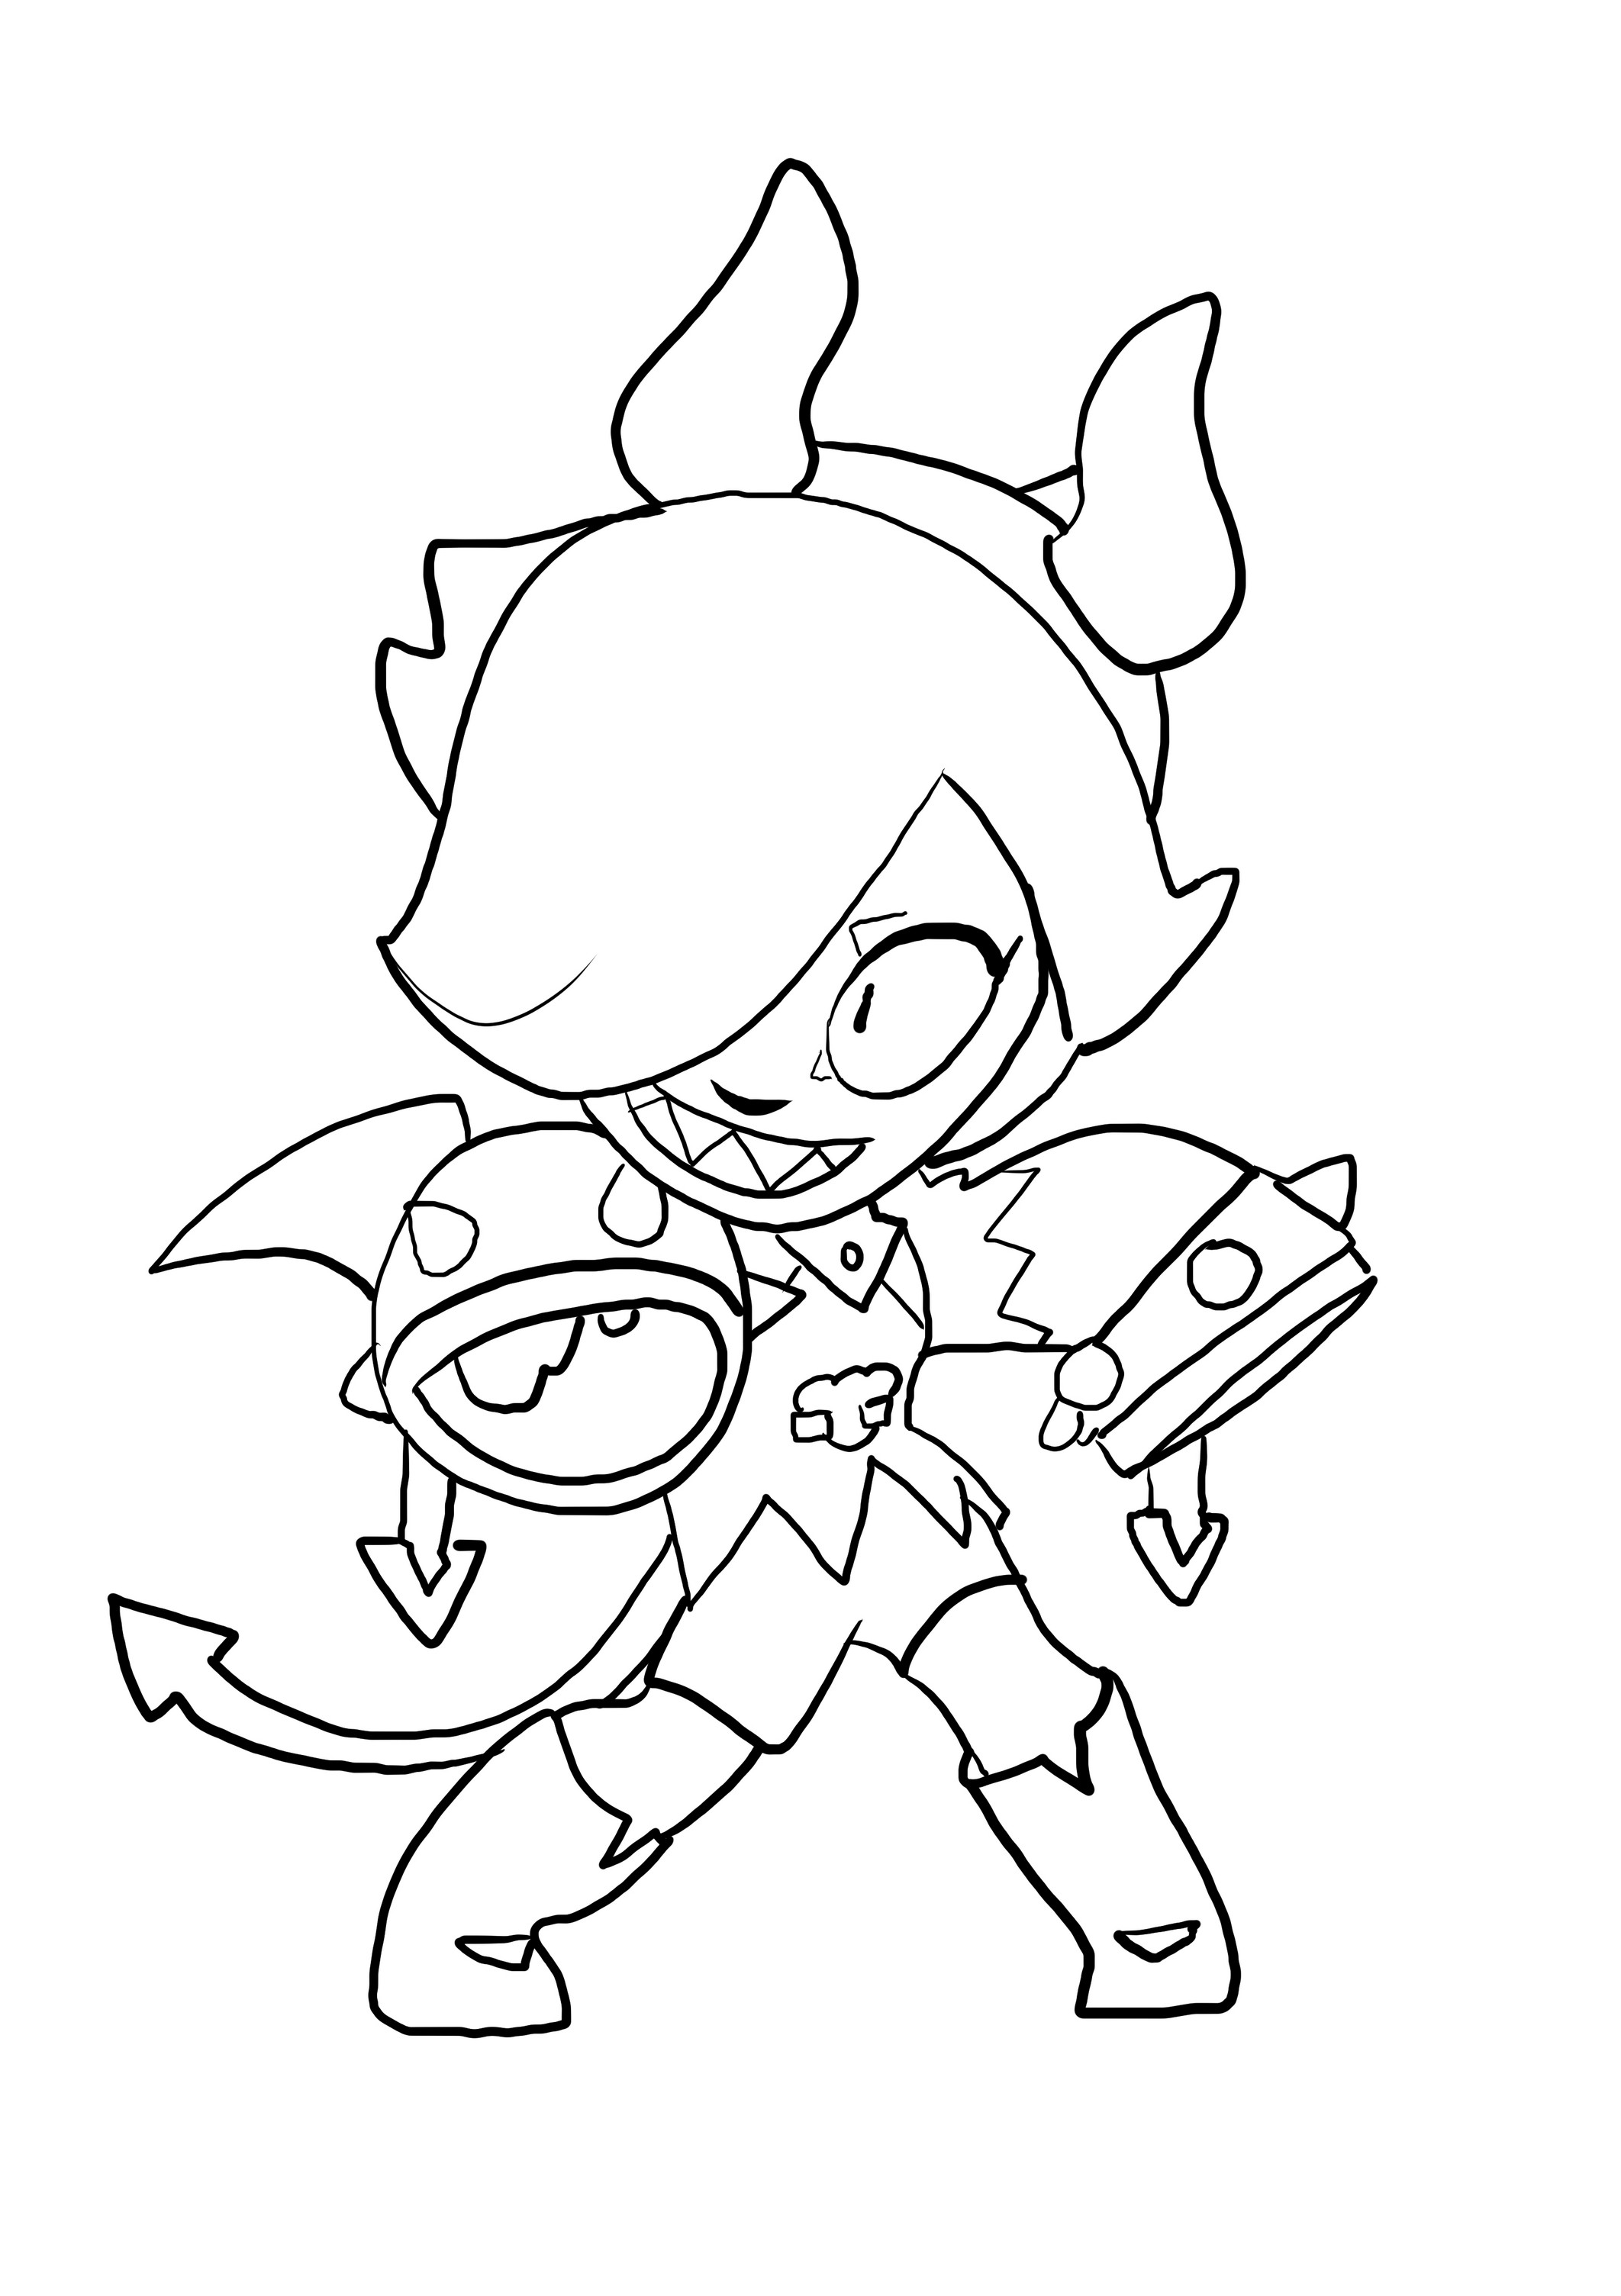 Trixie Colette from Brawl Stars coloring page to print and coloring